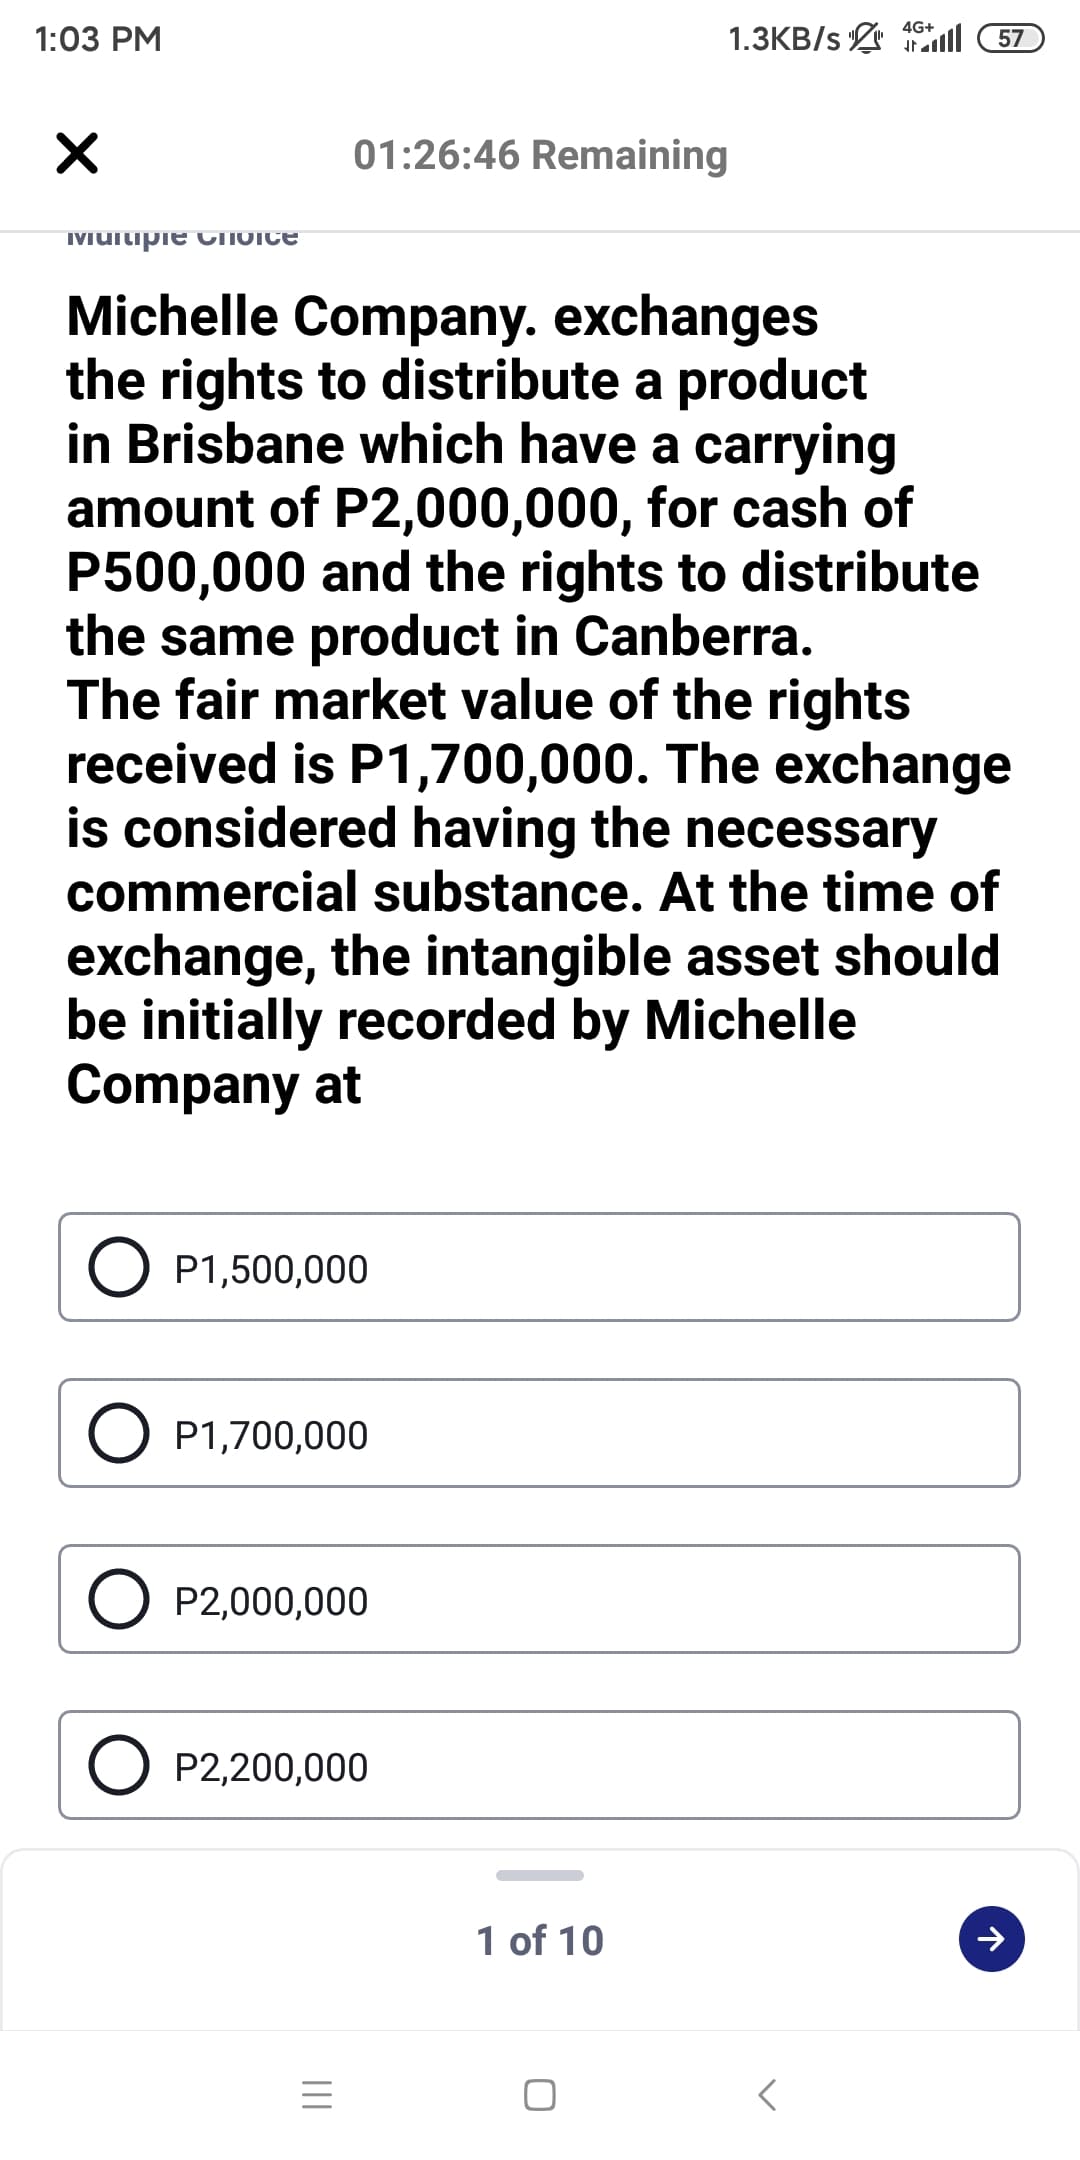 4G+
1:03 PM
1.3KB/s ll 57
01:26:46 Remaining
MMUltipie CTIOICE
Michelle Company. exchanges
the rights to distribute a product
in Brisbane which have a carrying
amount of P2,000,000, for cash of
P500,000 and the rights to distribute
the same product in Canberra.
The fair market value of the rights
received is P1,700,000. The exchange
is considered having the necessary
commercial substance. At the time of
exchange, the intangible asset should
be initially recorded by Michelle
Company at
P1,500,000
O P1,700,000
O P2,000,000
O P2,200,000
1 of 10
